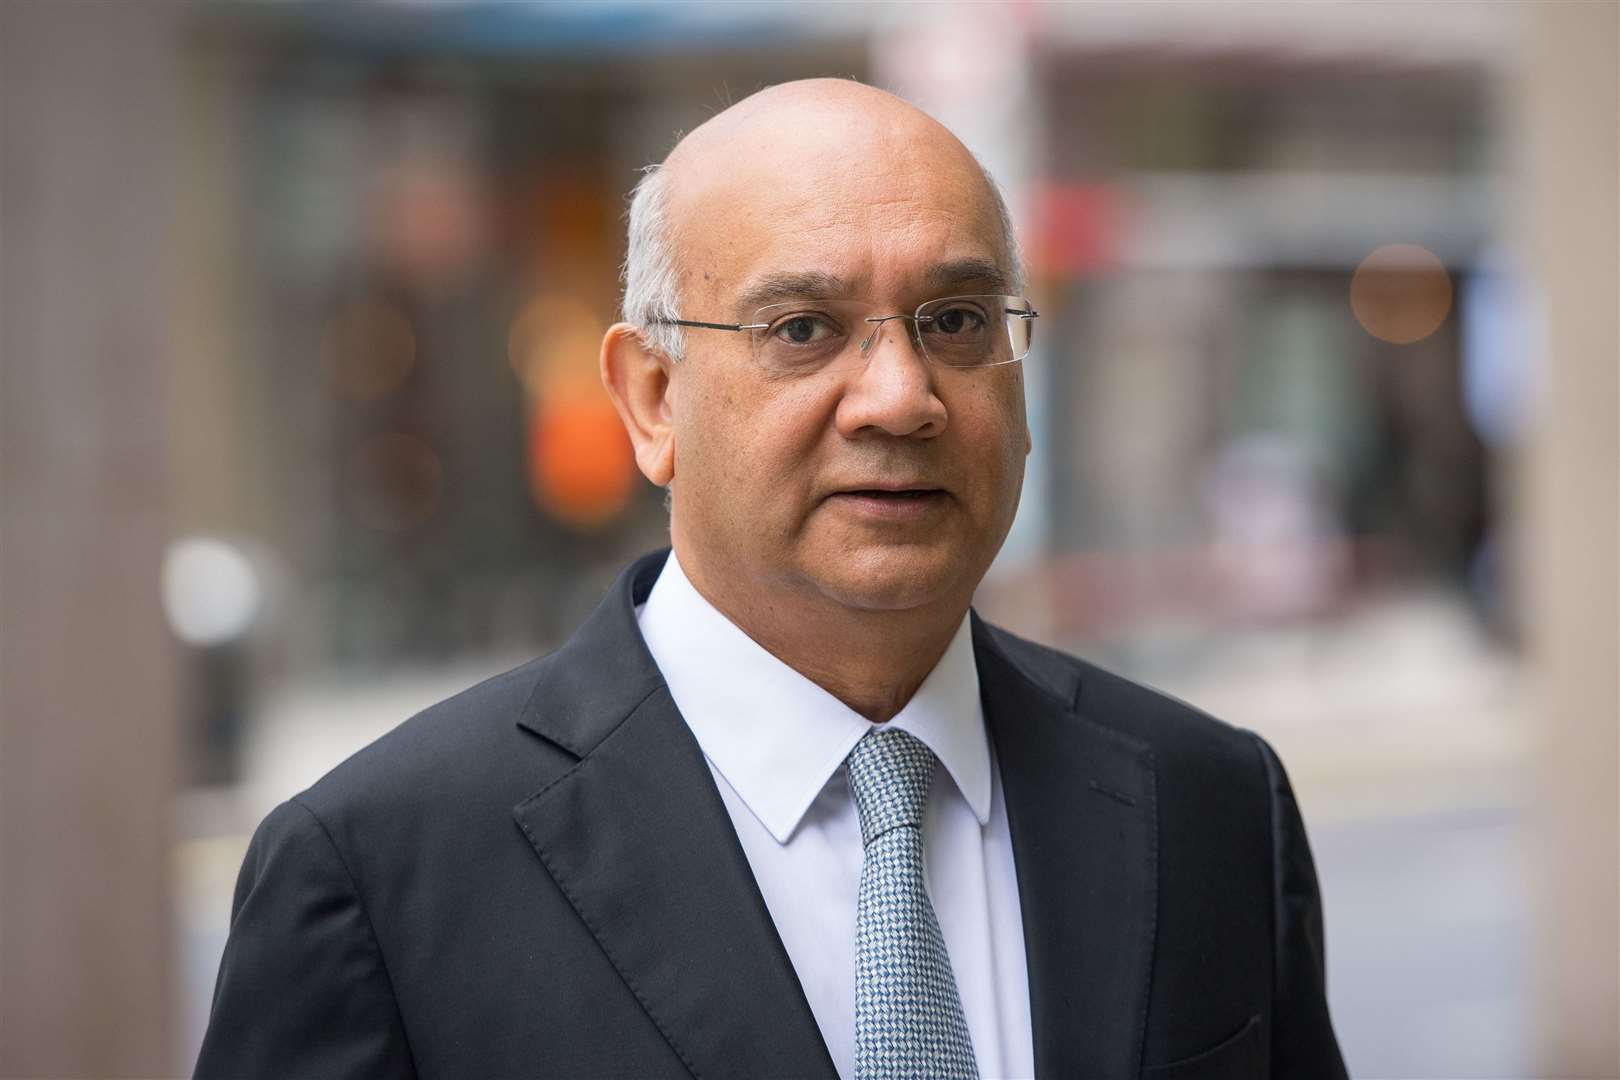 Former Labour MP Keith Vaz received a six-month suspension in 2019 (PA)